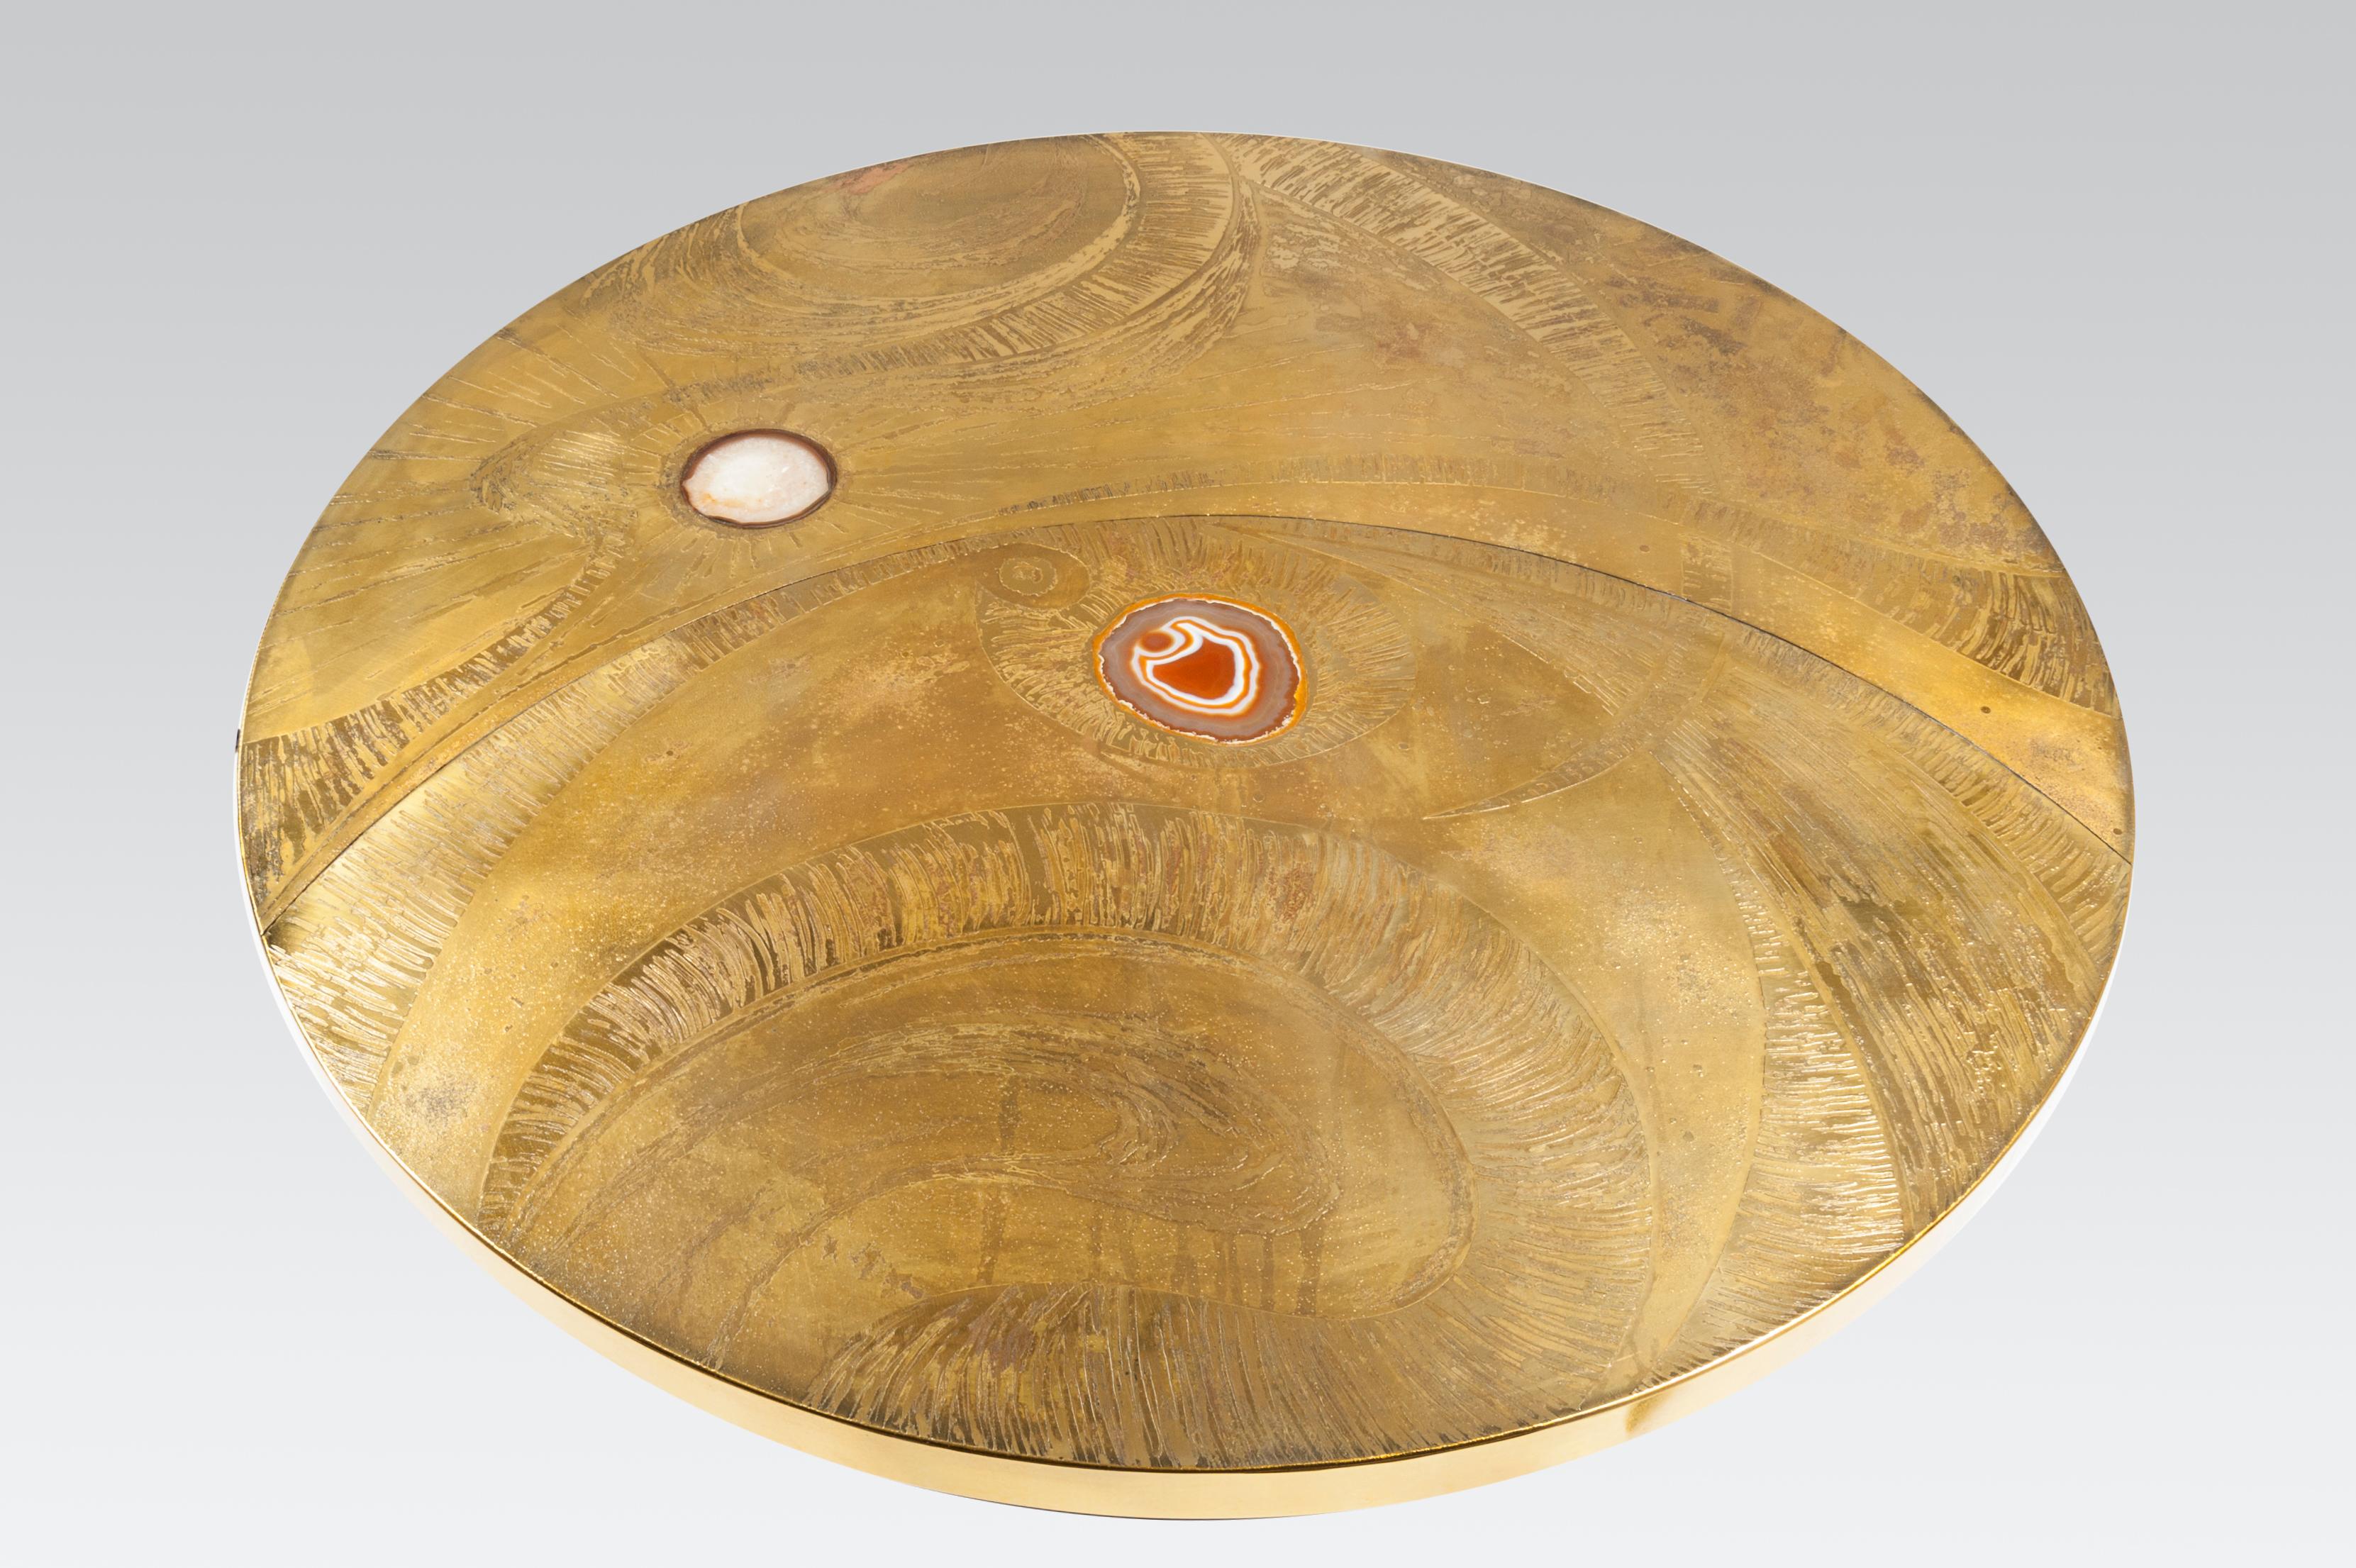 Mid-Century Modern Etched Circular Brass Coffee Table Inlay 2 Agates by VDL, circa 1980